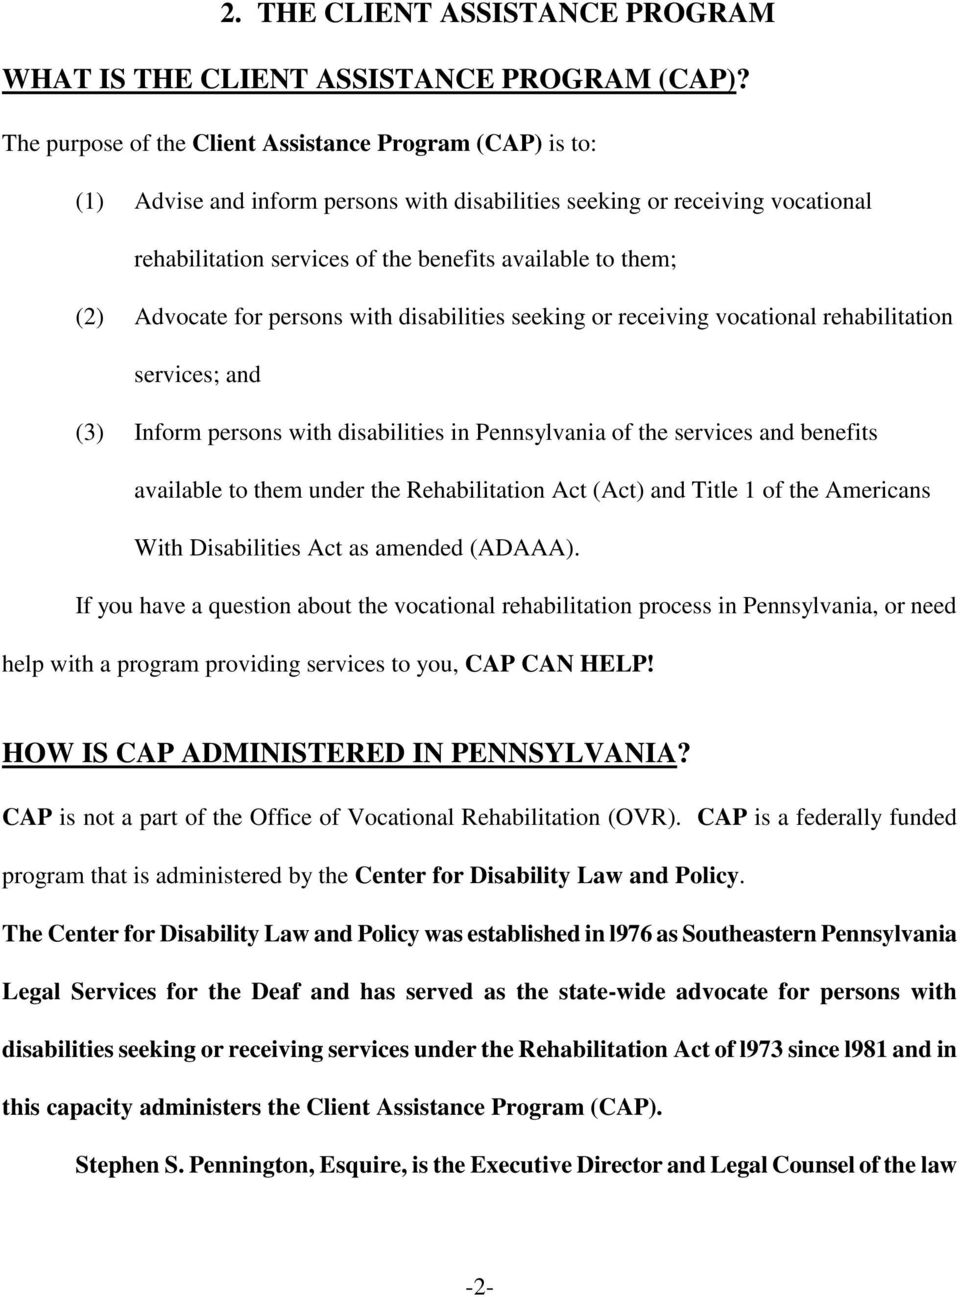 (2) Advocate for persons with disabilities seeking or receiving vocational rehabilitation services; and (3) Inform persons with disabilities in Pennsylvania of the services and benefits available to